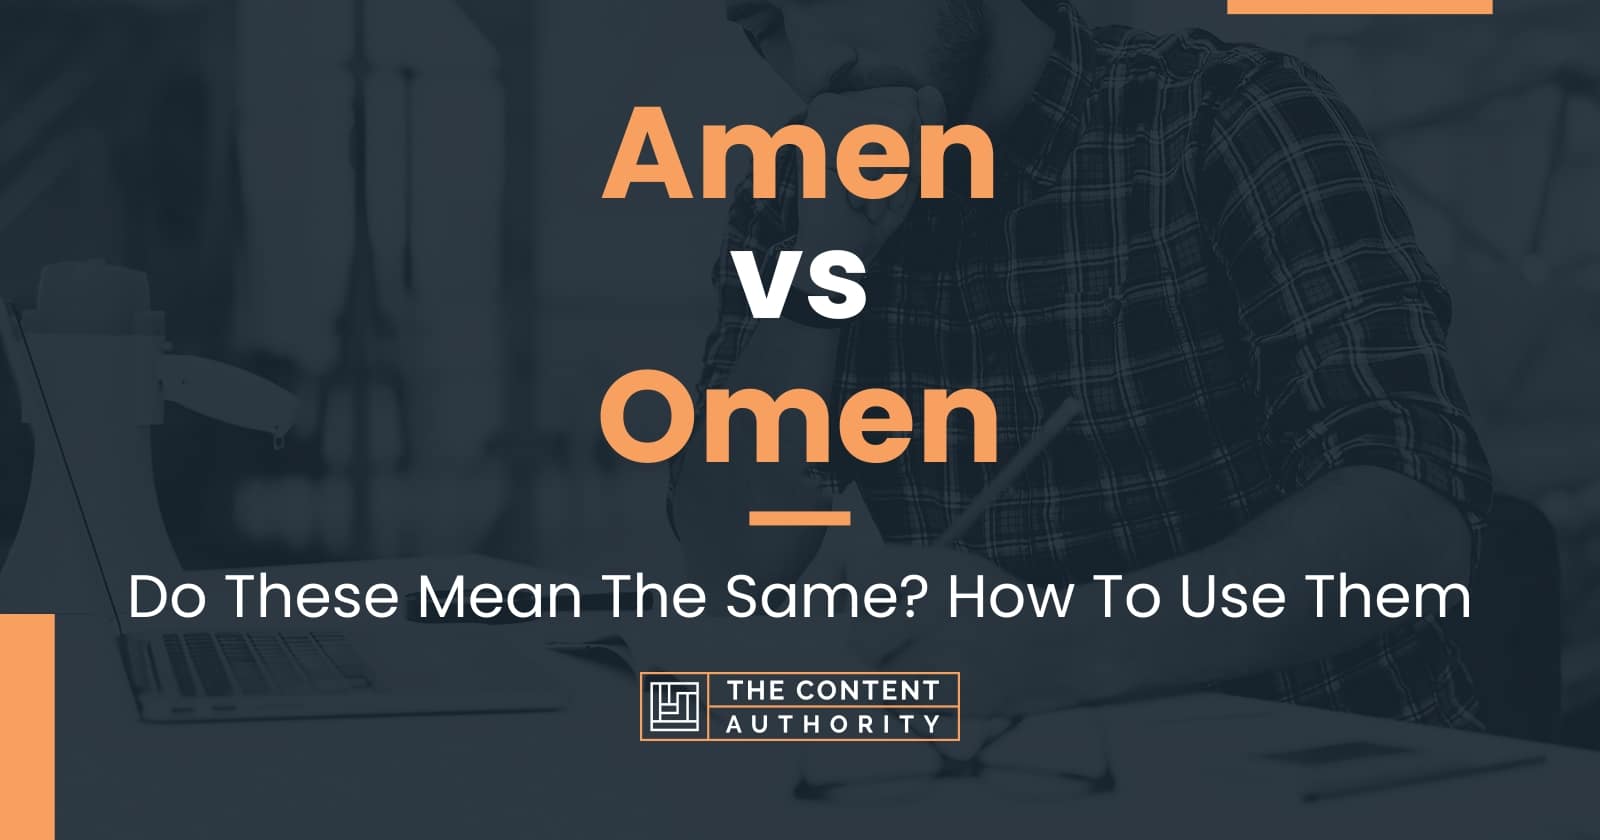 Amen vs Omen Do These Mean The Same? How To Use Them